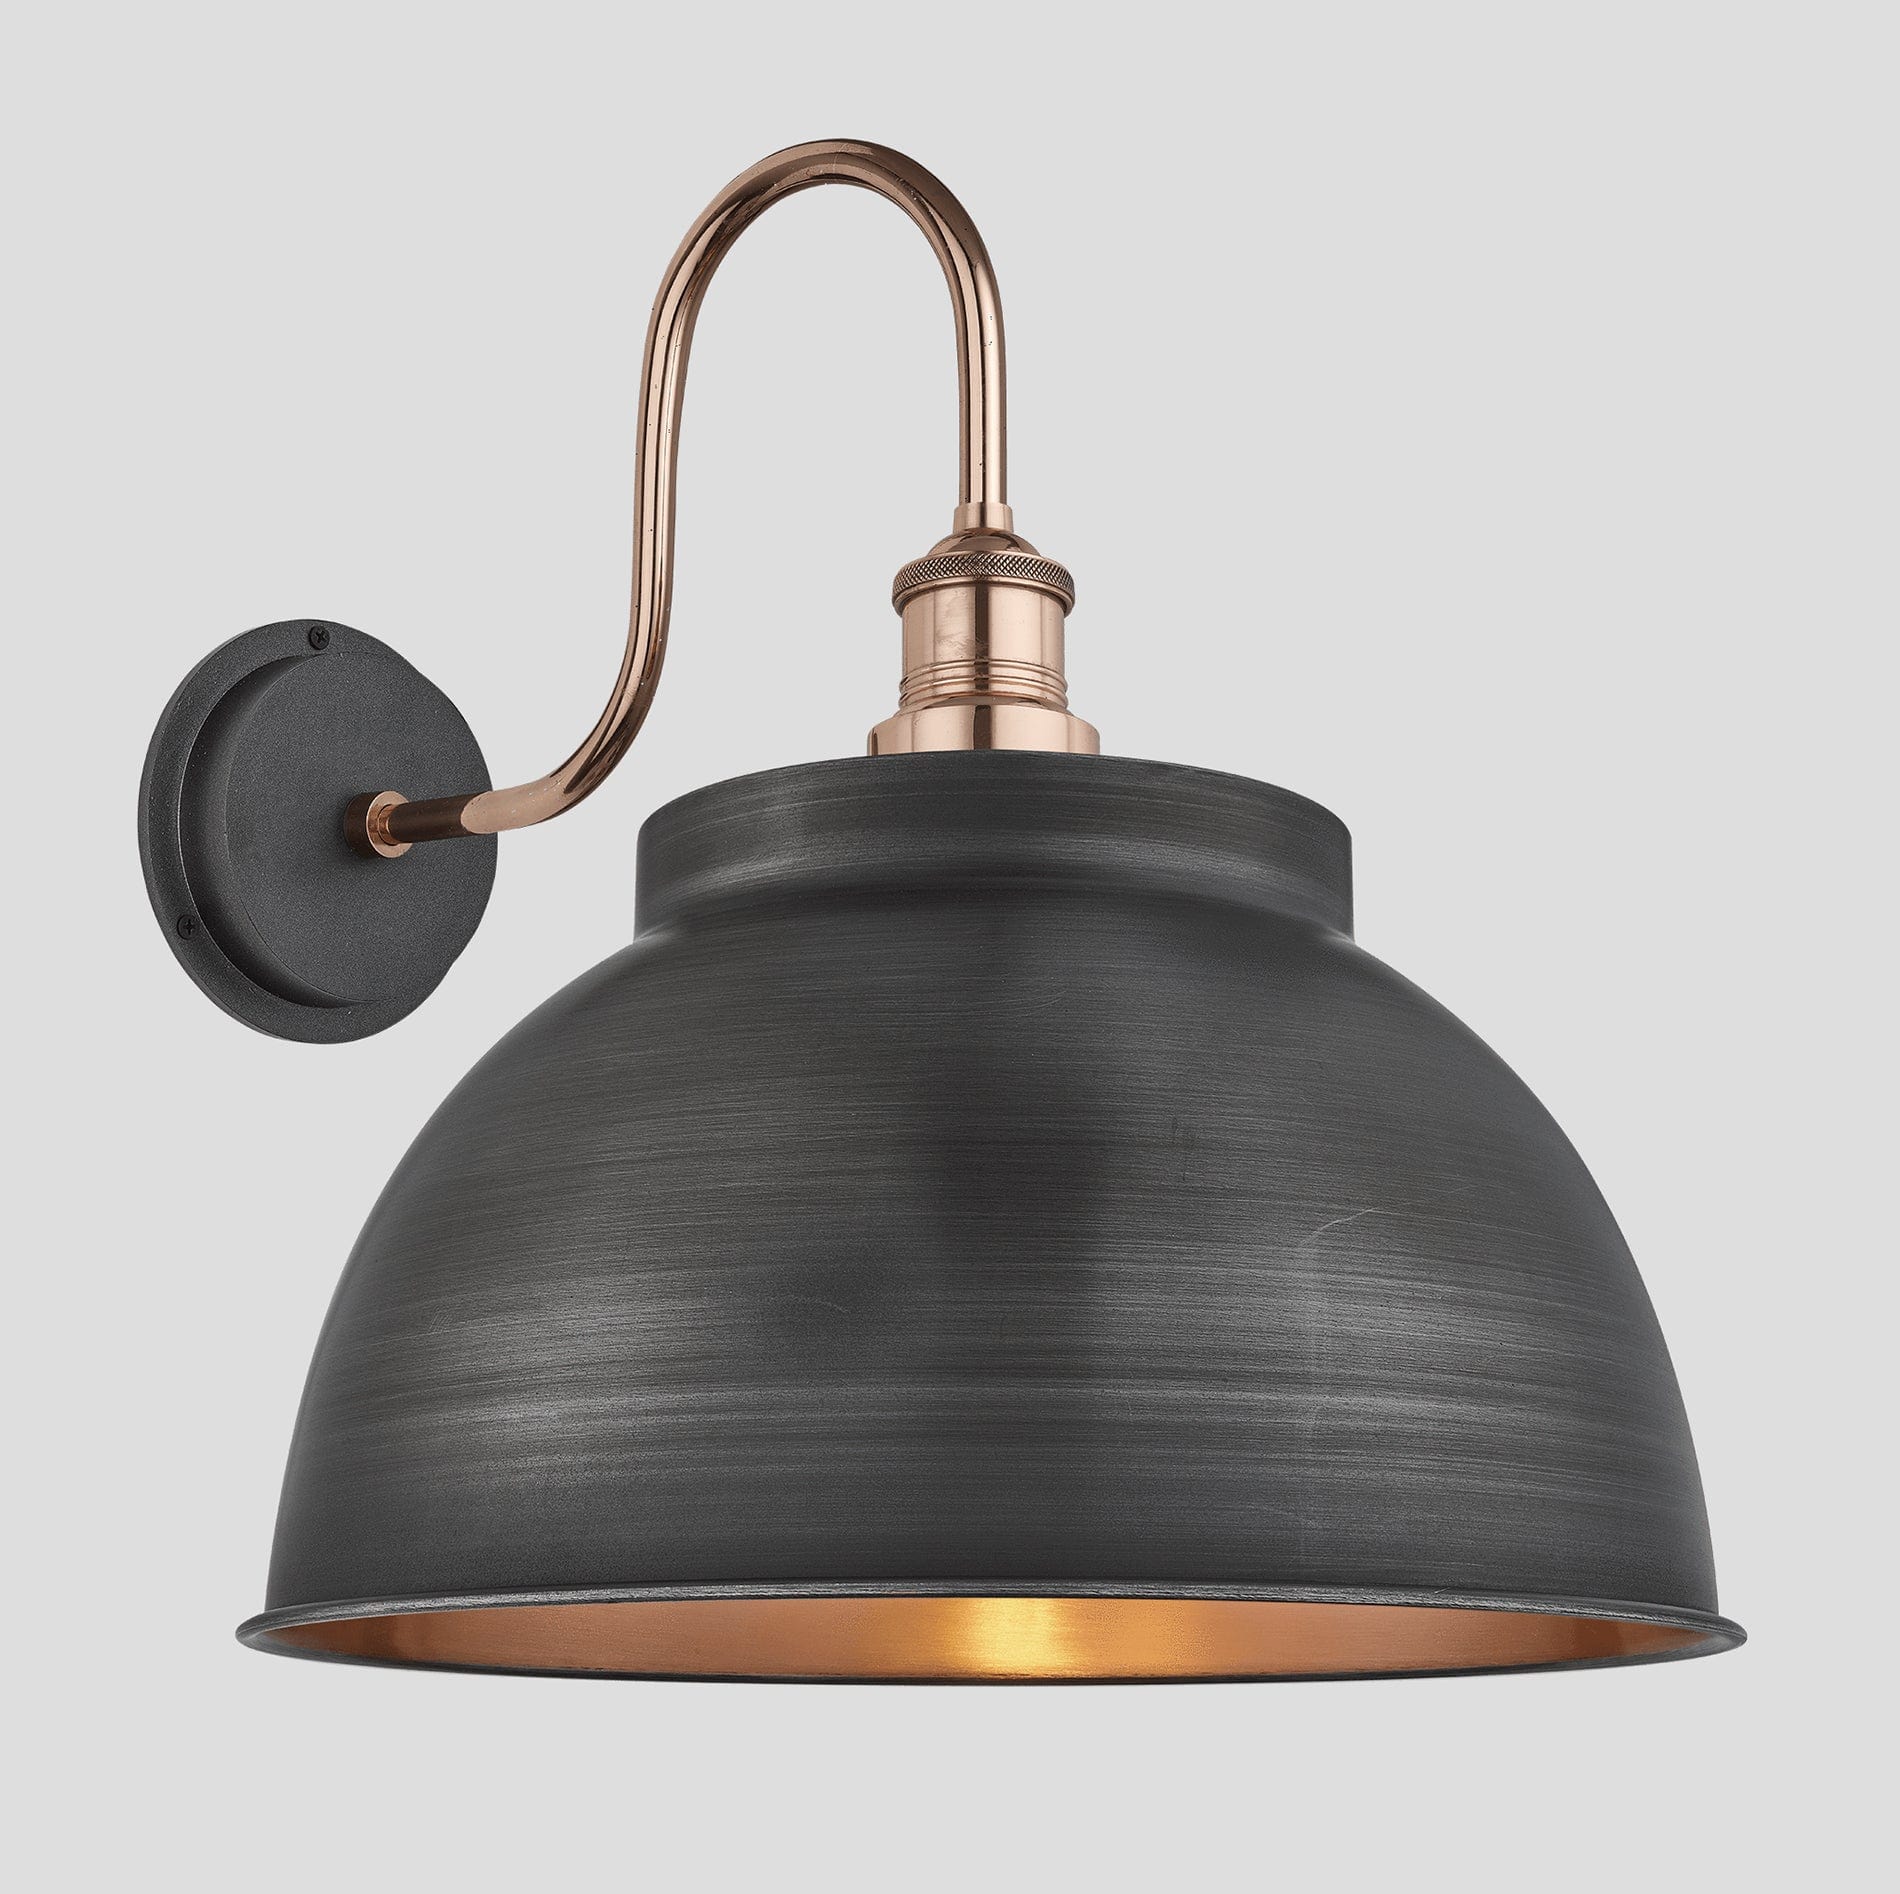 Swan Neck Outdoor & Bathroom Dome Wall Light - 17 Inch - Pewter & Copper Industville SN-IP65-DWL17-CP-CH